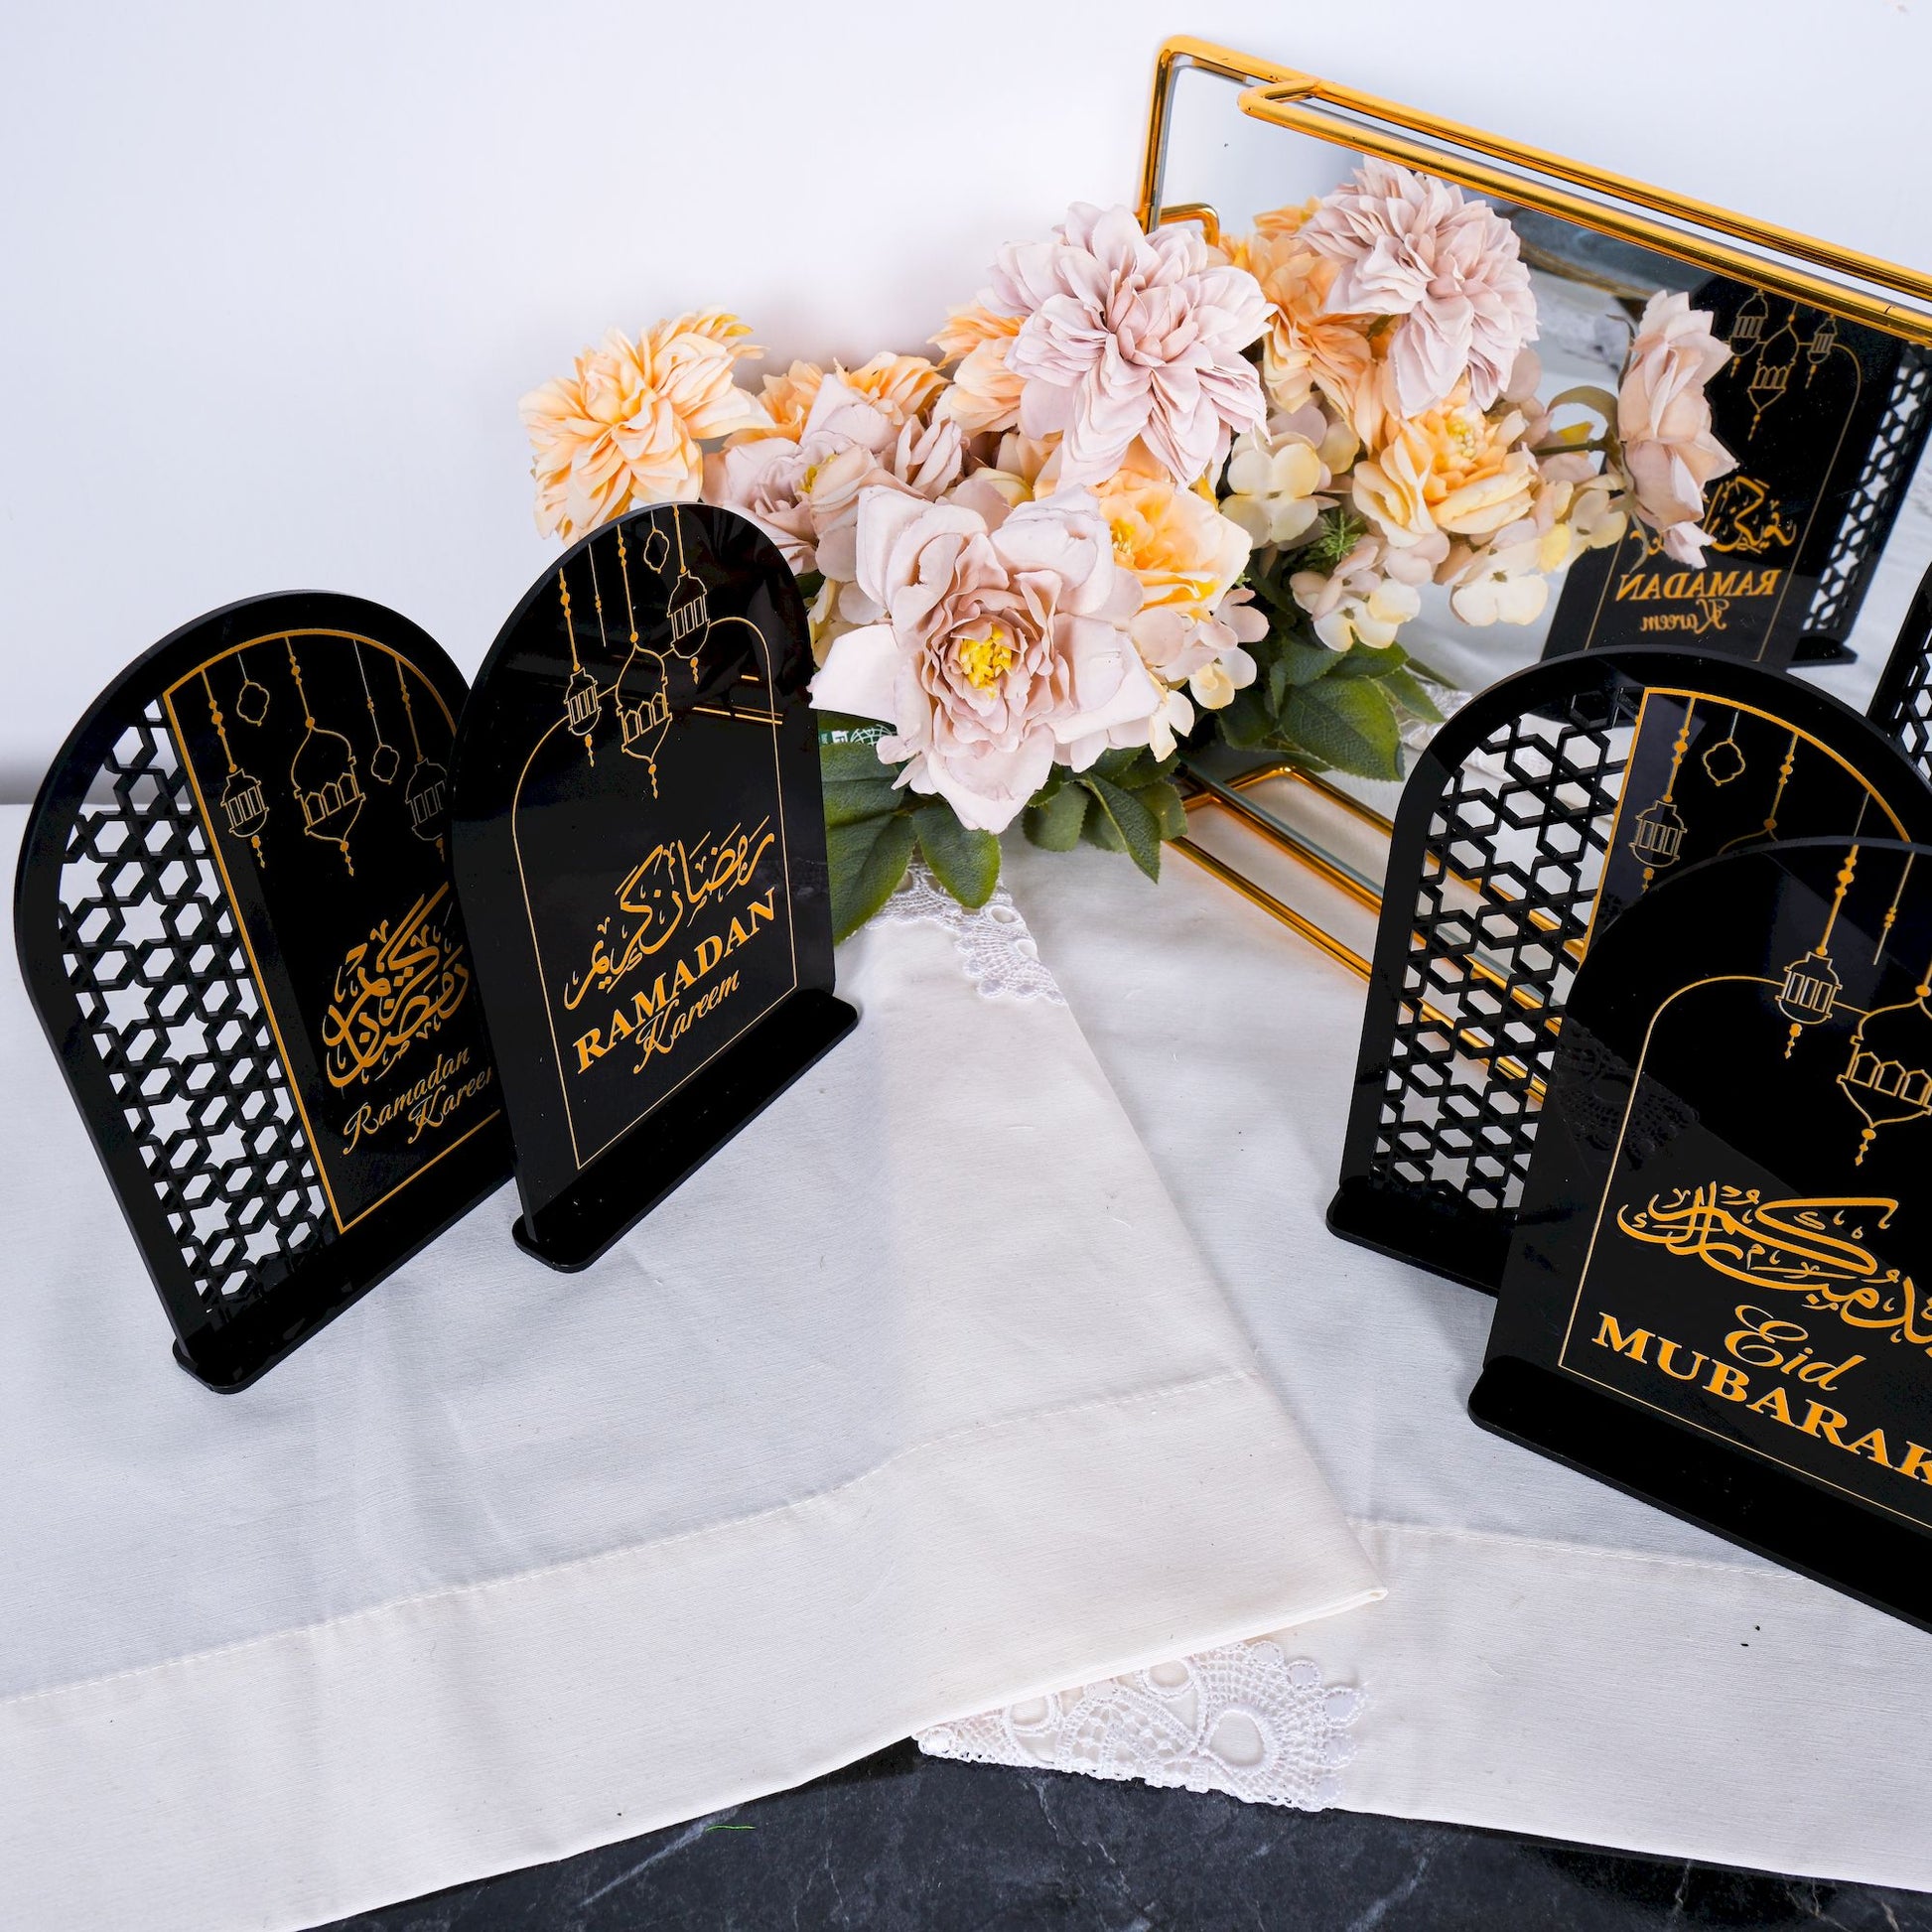 Ramadan Eid Table Decor Islamic Art Favor Tabletop Sign&Stand Gift - Islamic Elite Favors is a handmade gift shop offering a wide variety of unique and personalized gifts for all occasions. Whether you're looking for the perfect Ramadan, Eid, Hajj, wedding gift or something special for a birthday, baby shower or anniversary, we have something for everyone. High quality, made with love.